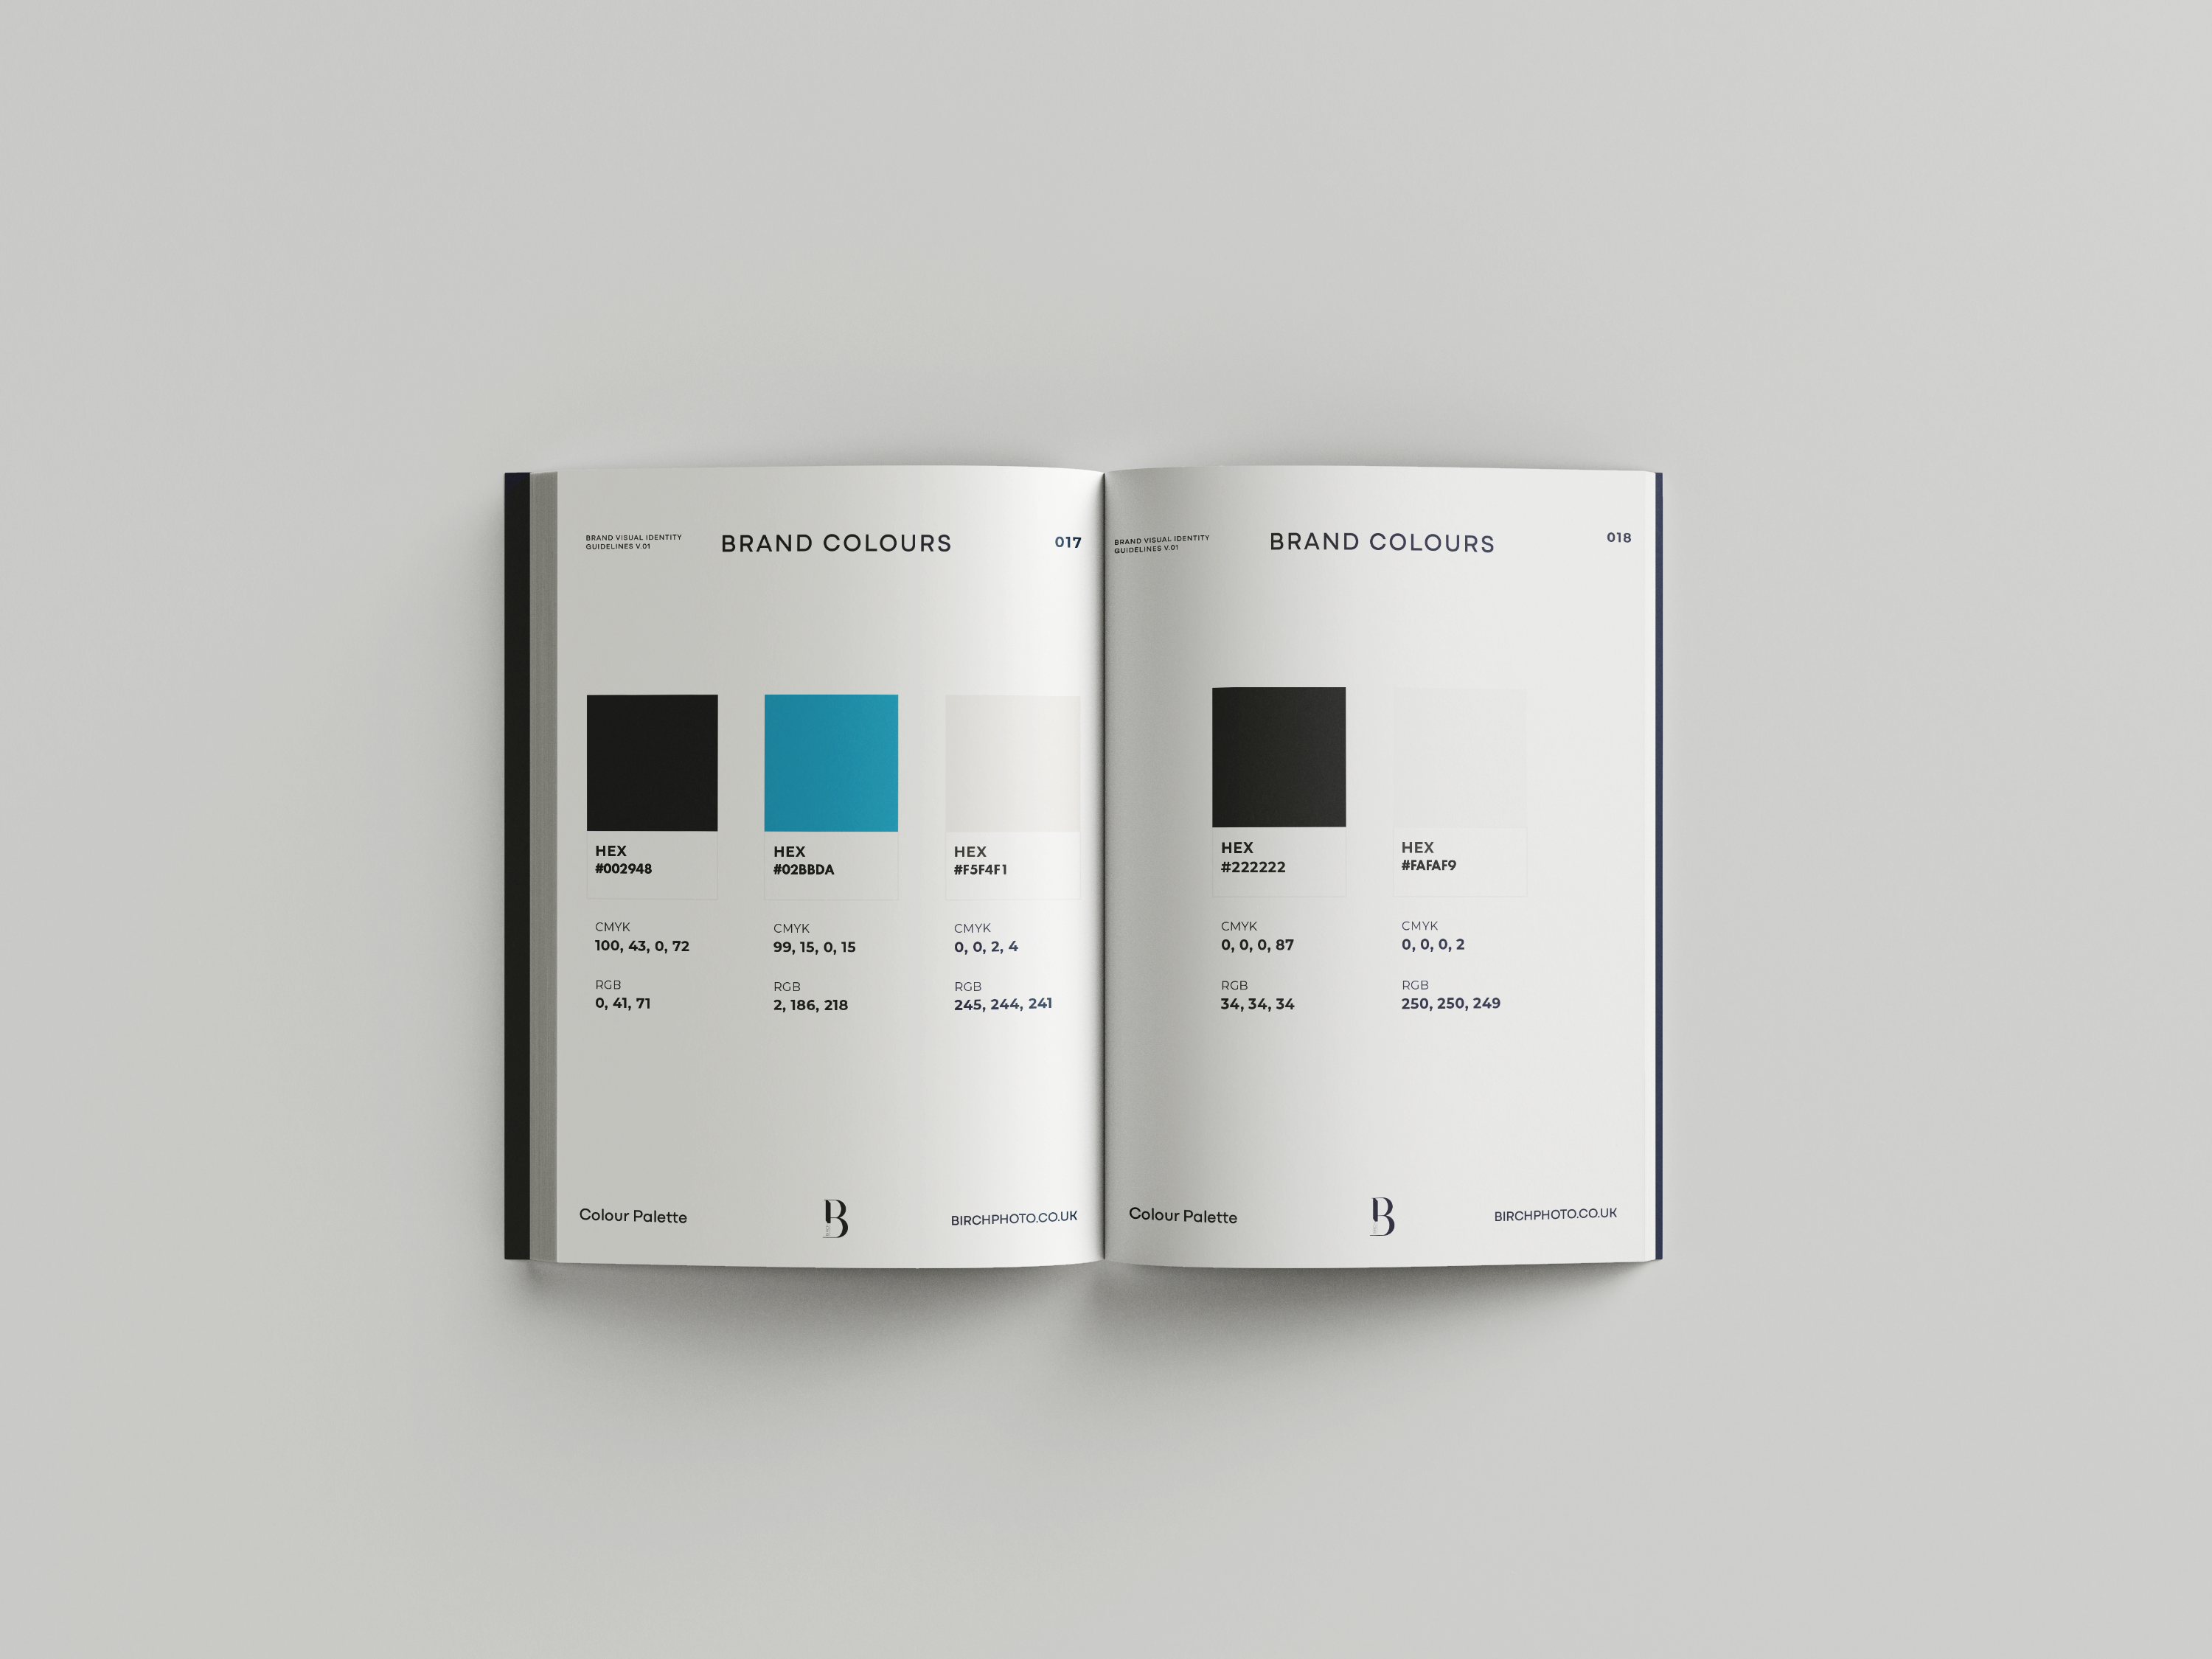 The brand guidelines open on the pages for 'Colours'.